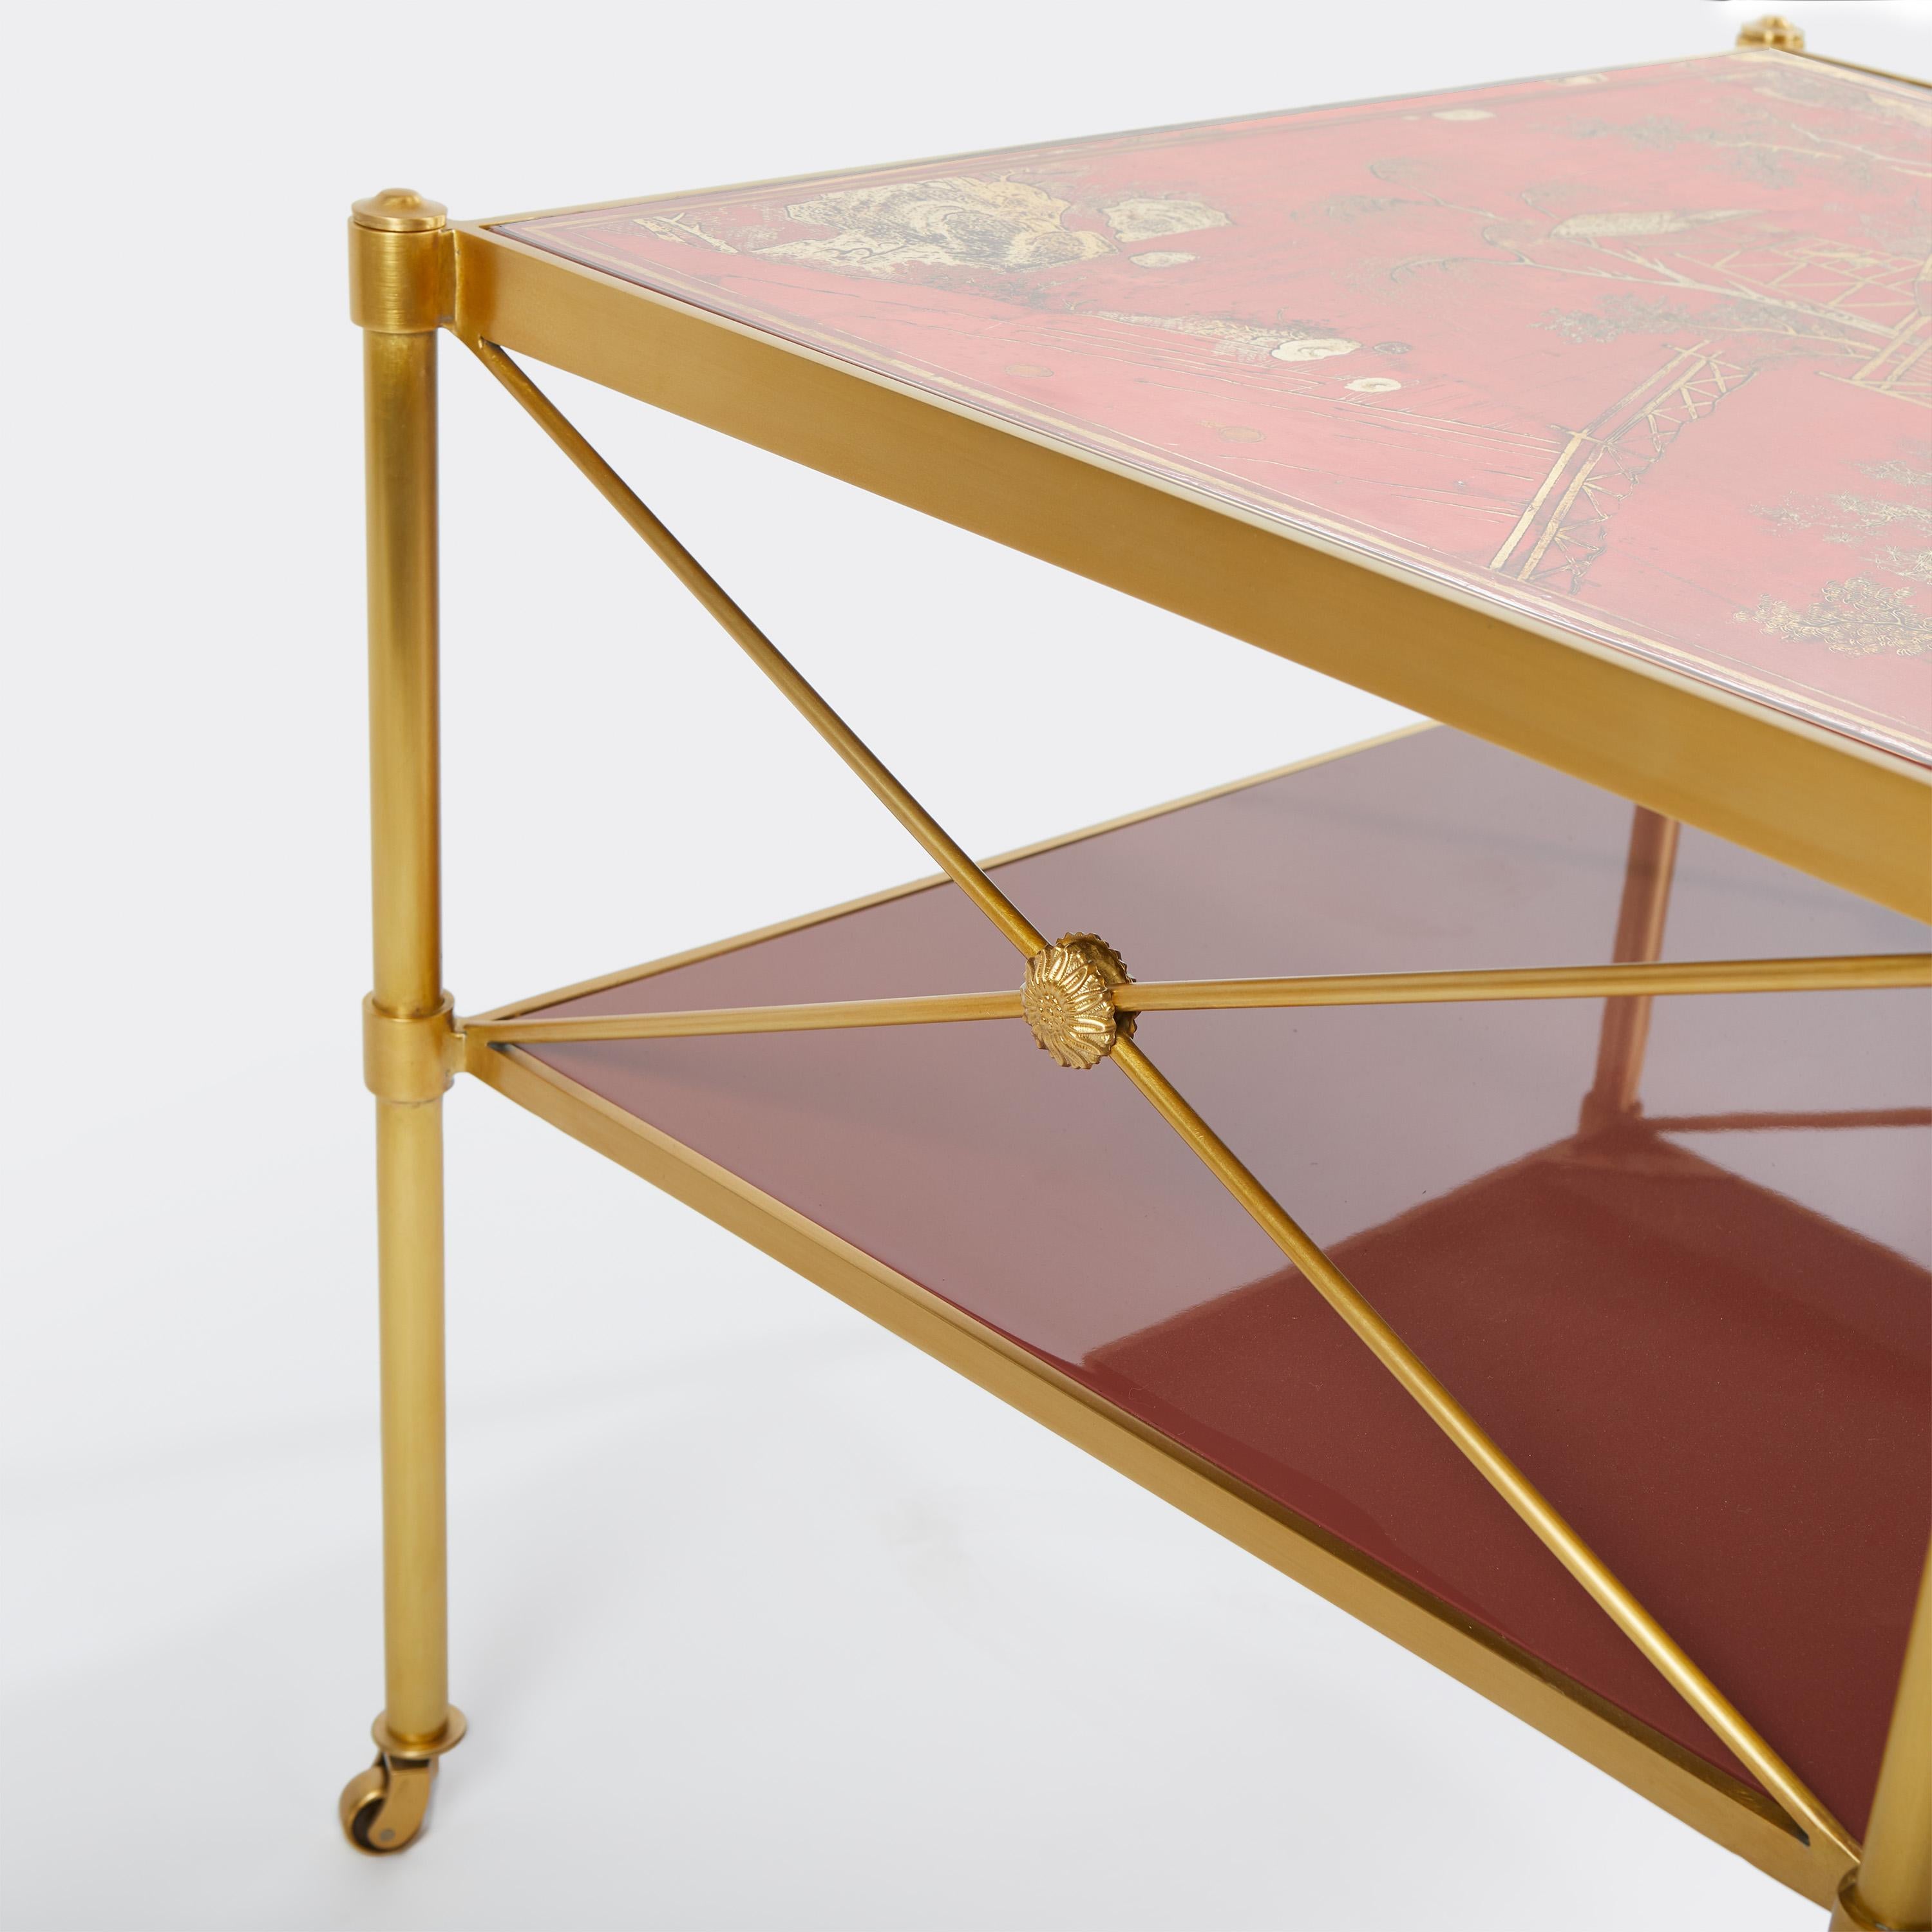 The Sert side tables in red, designed by David Duncan. Each table top features a hand painted, one of a kind Chinoiserie panel. With giltwood framed lacquered panel inset top with glass cover, and a lacquered red wood panel second tier. Each table